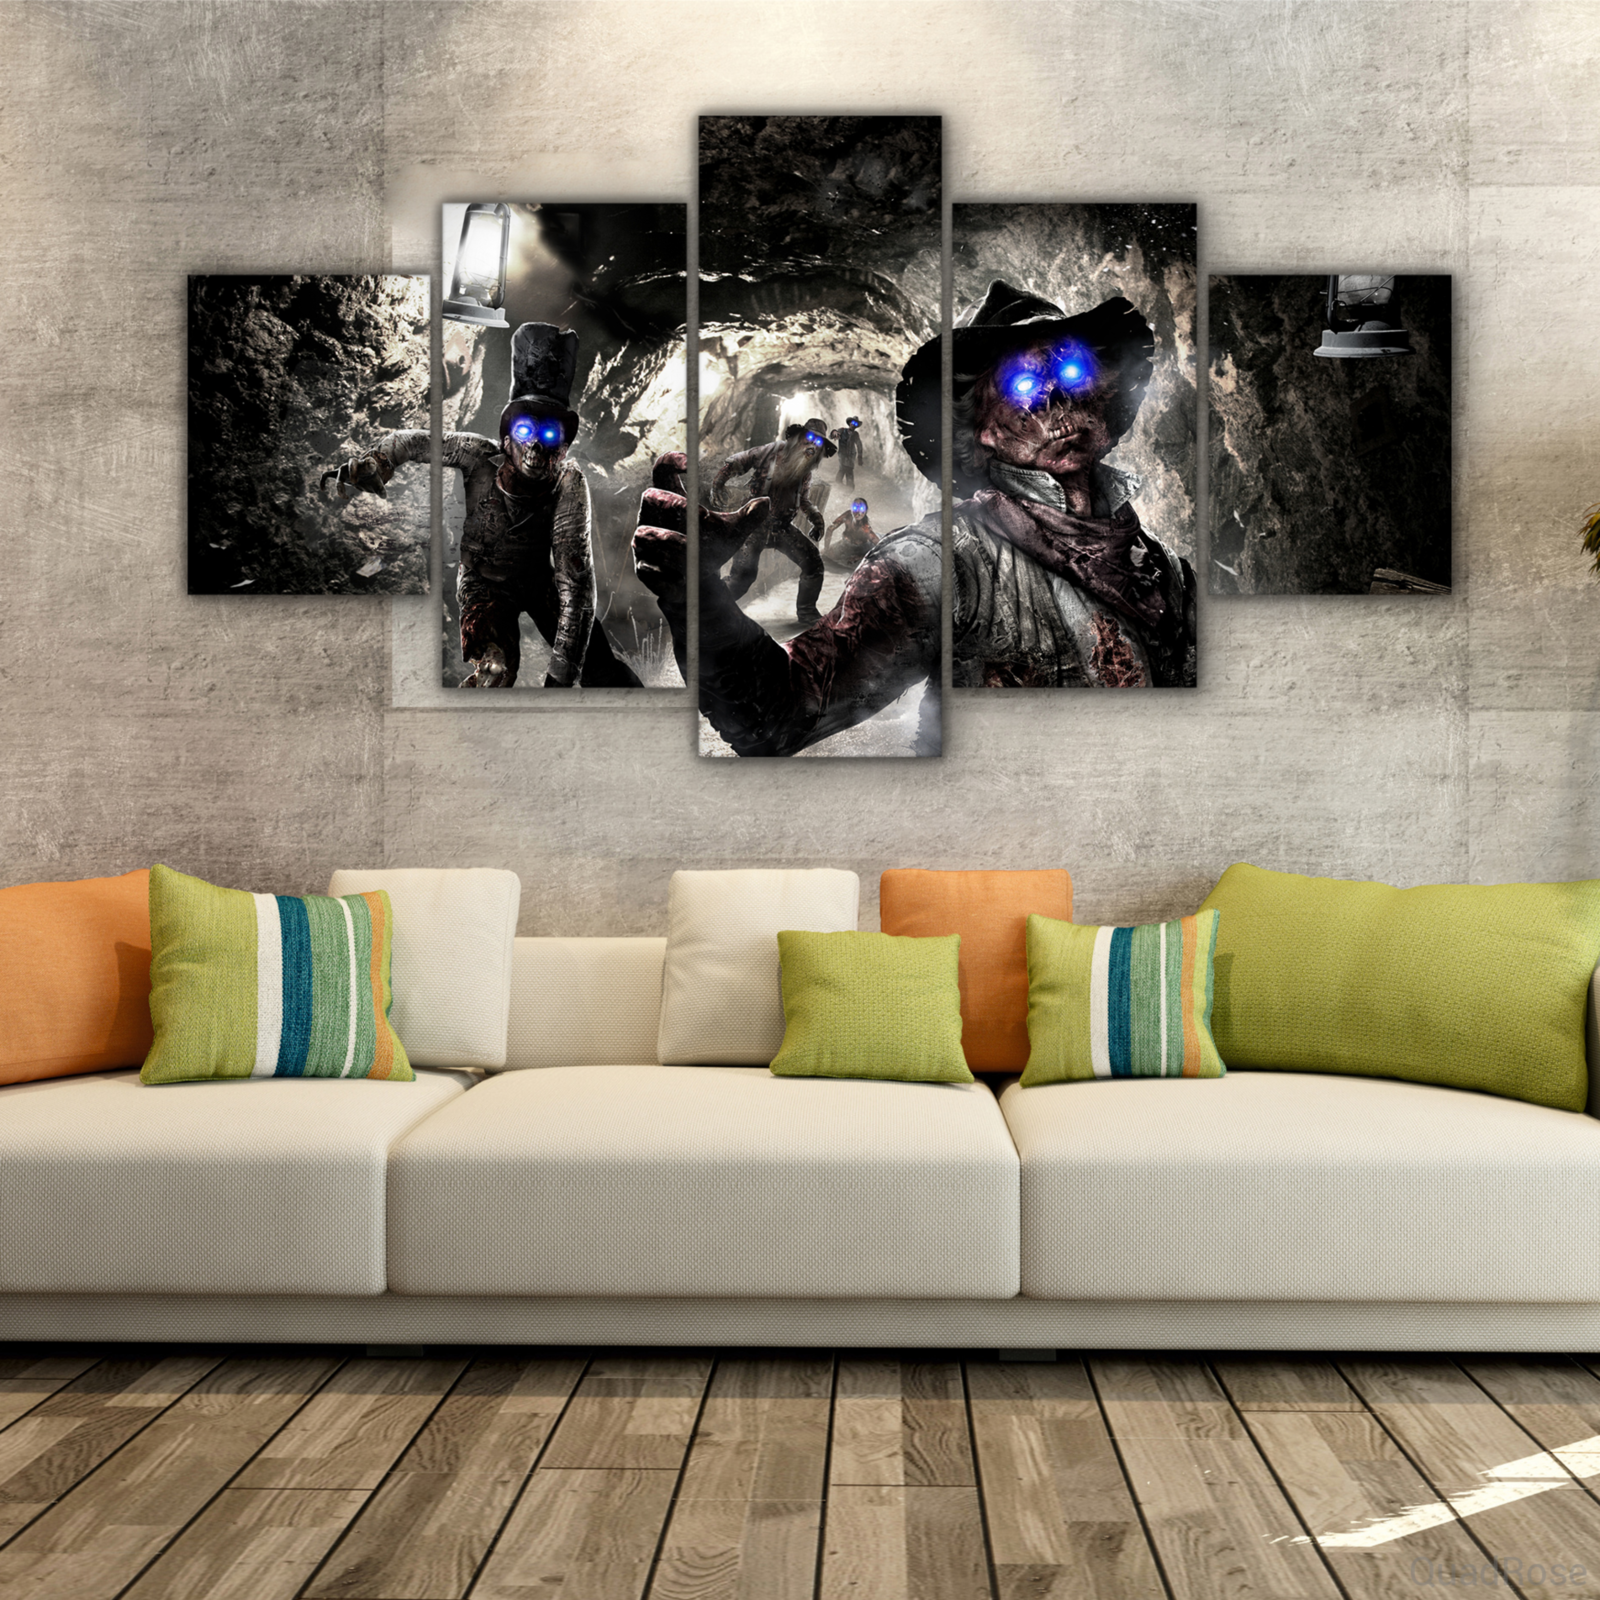 WITIN Call of Duty Ghost Azrael Poster Decorative Canvas Family